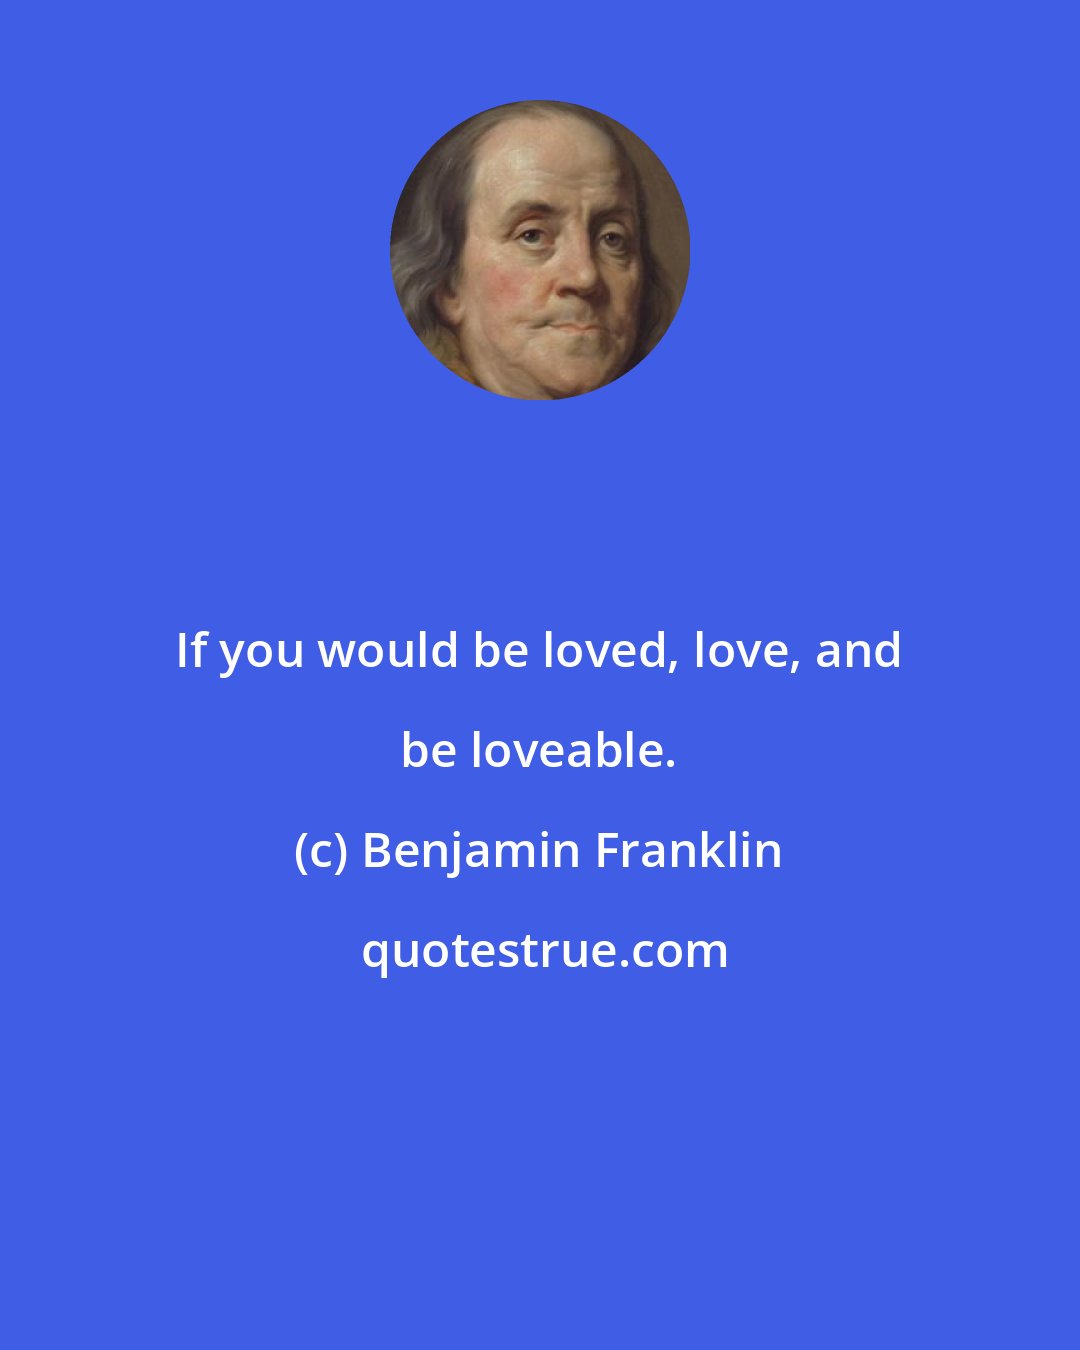 Benjamin Franklin: If you would be loved, love, and be loveable.